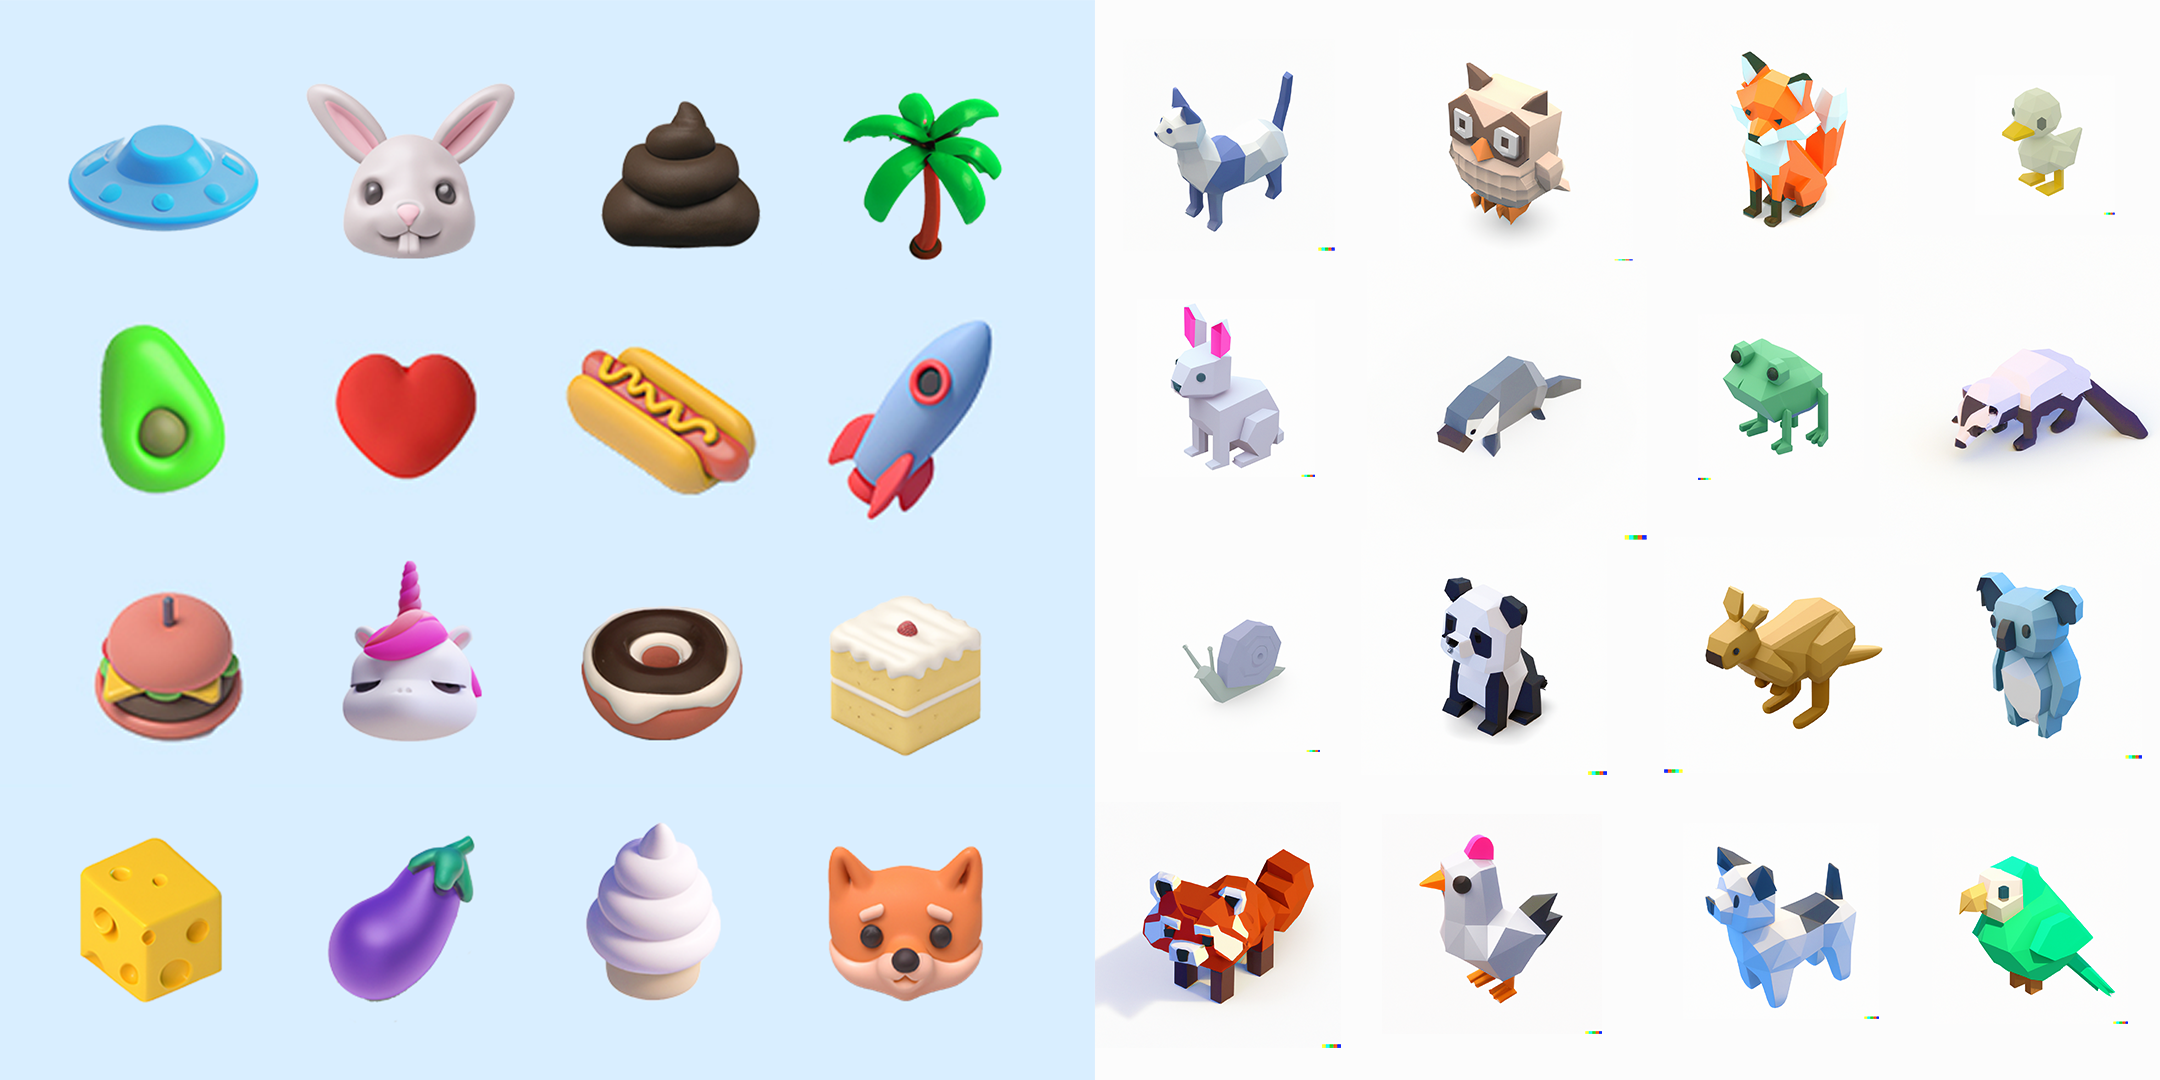 Clay Emojis and Polygon Animal prompt output images